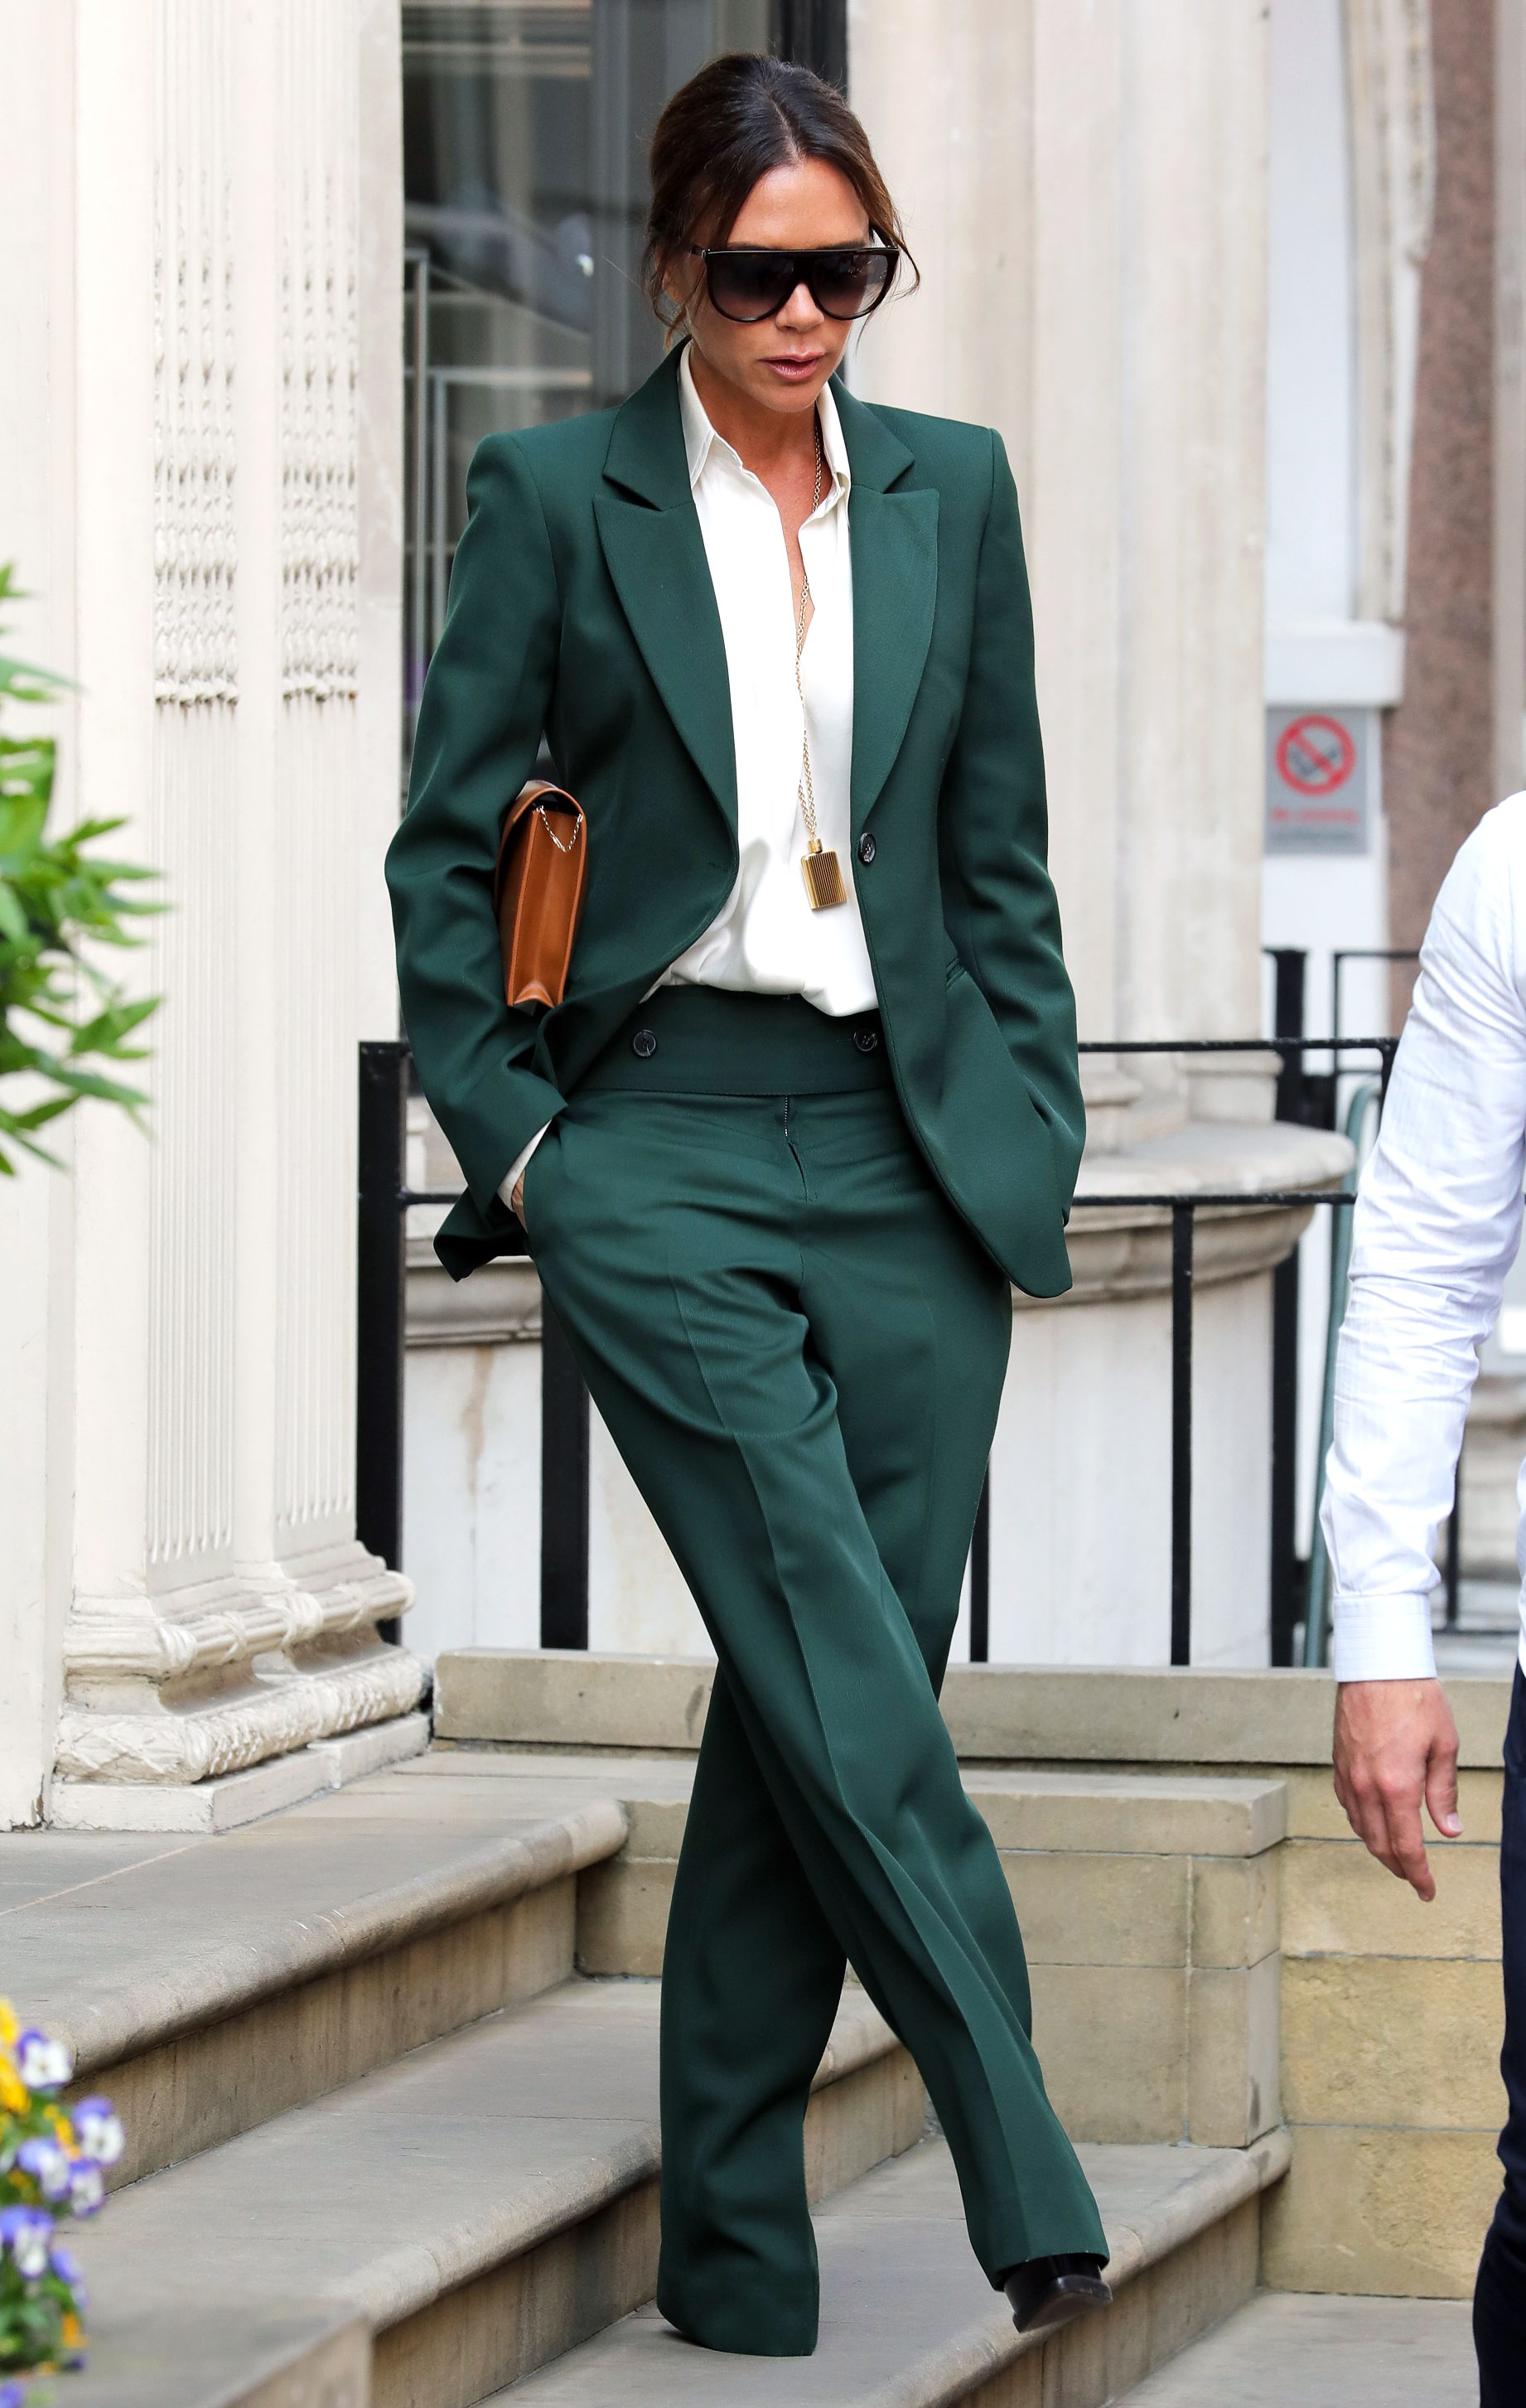 How To Get This Victoria Beckham White Suit Look for Less  fountainof30com